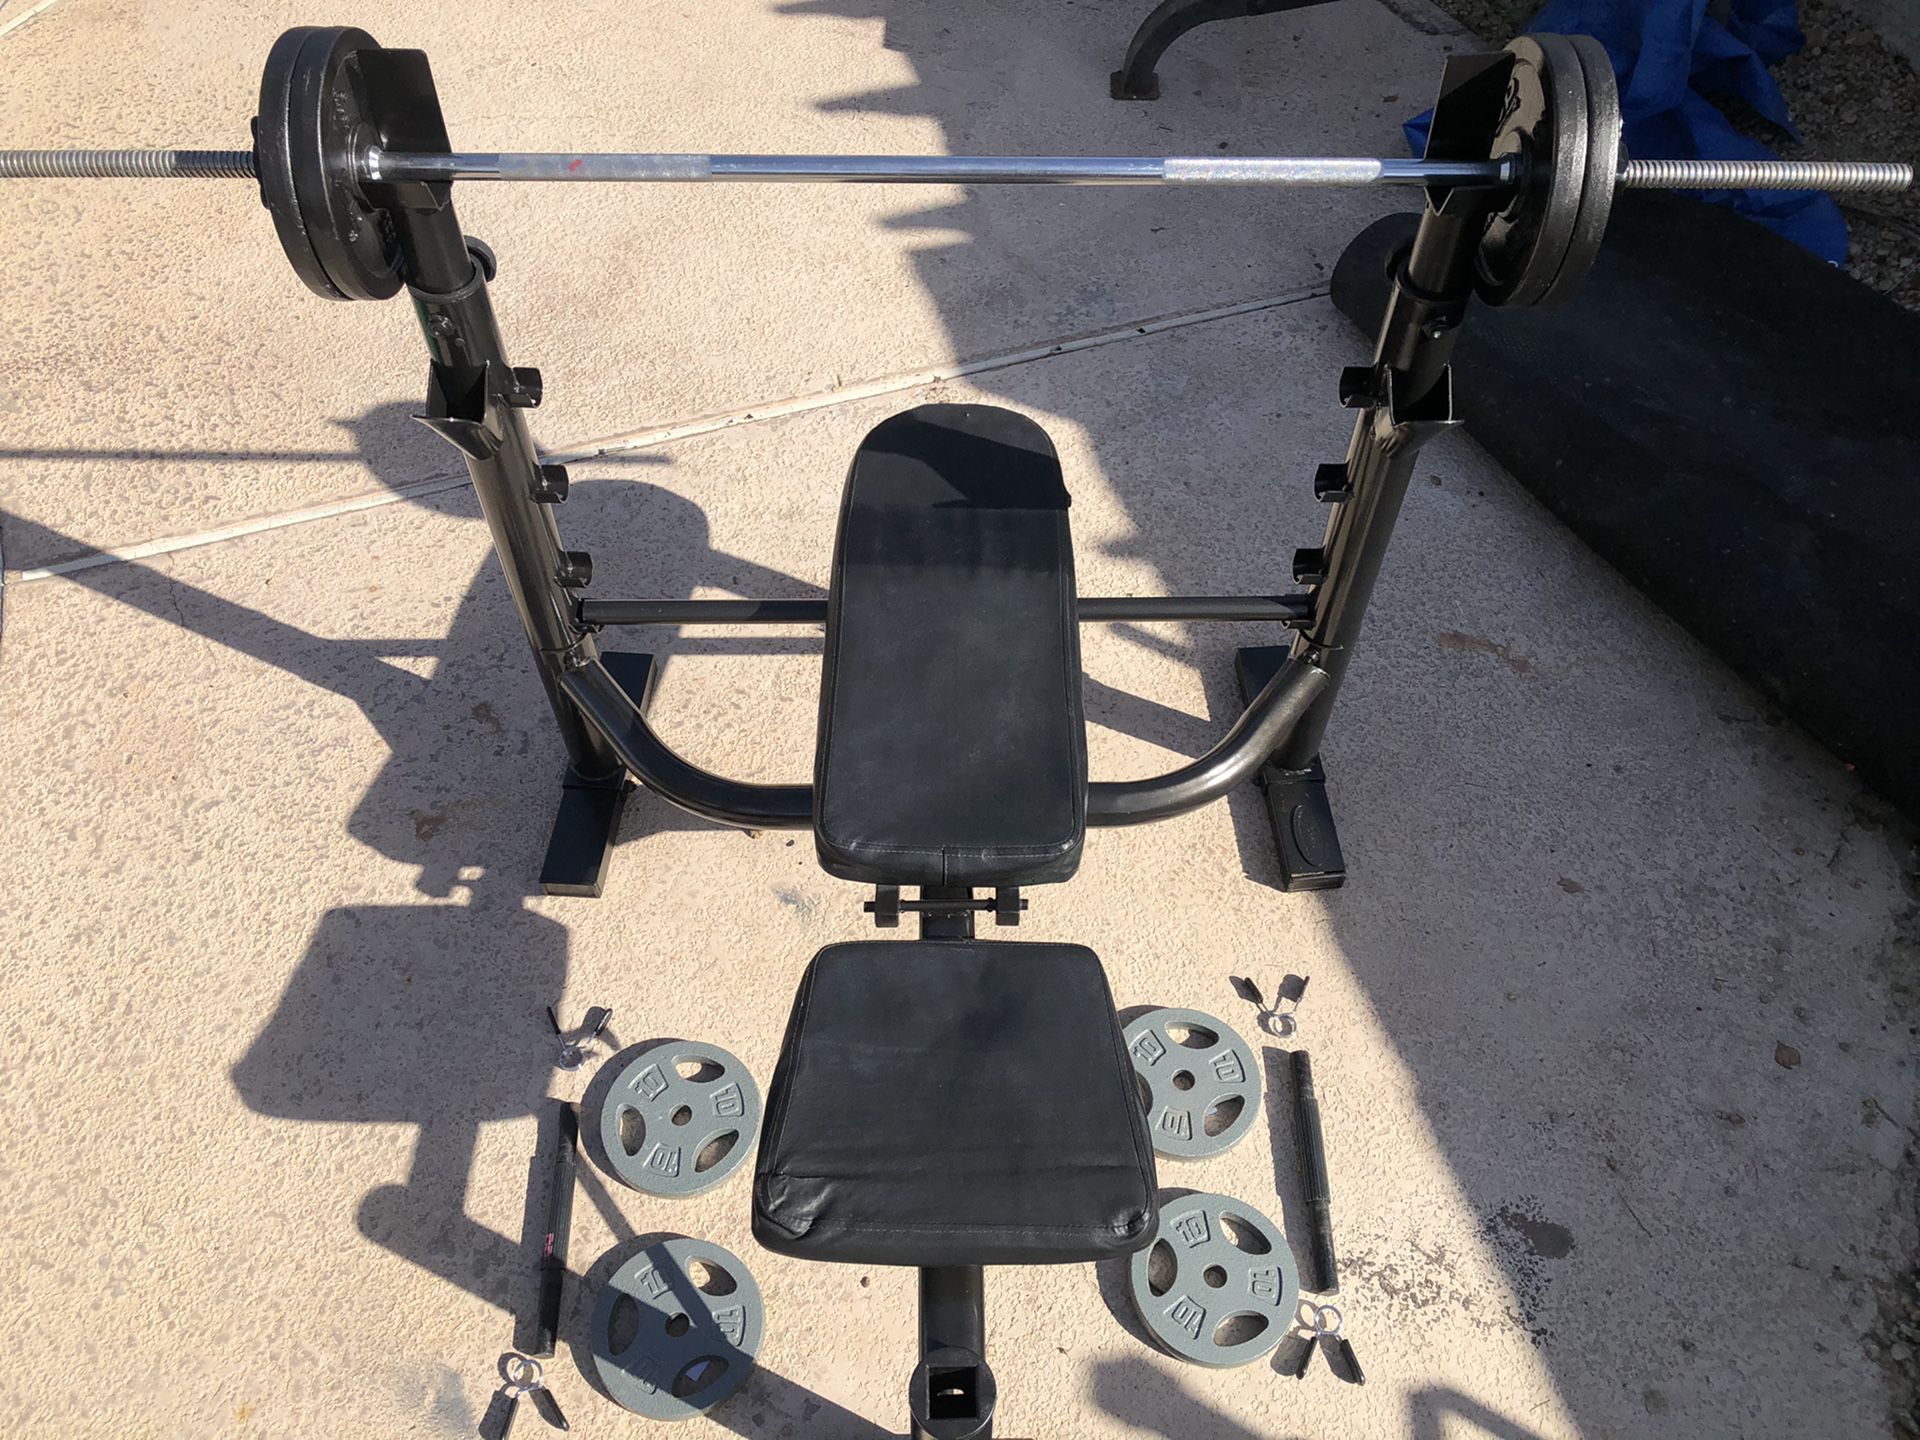 Adjustable workout bench press , With straight Bar & adjustable dumbbells with weight plates..$315 OBO